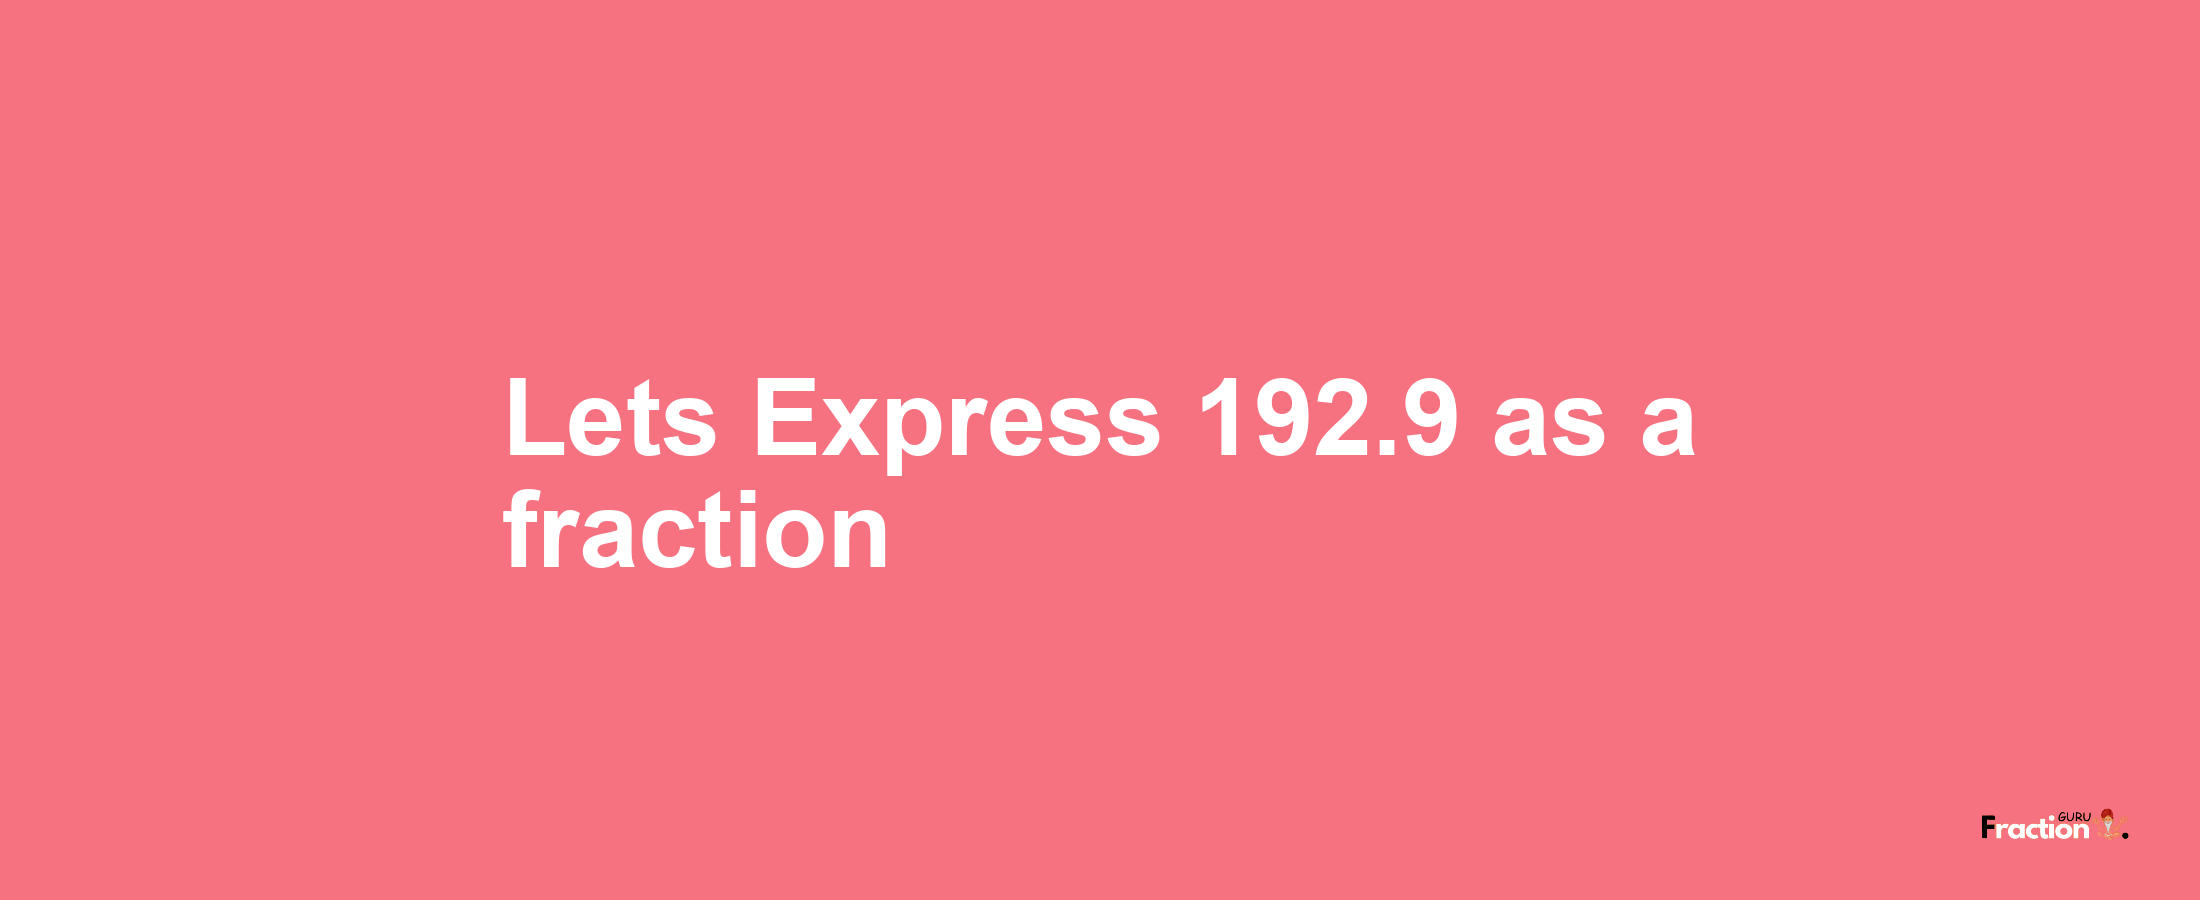 Lets Express 192.9 as afraction